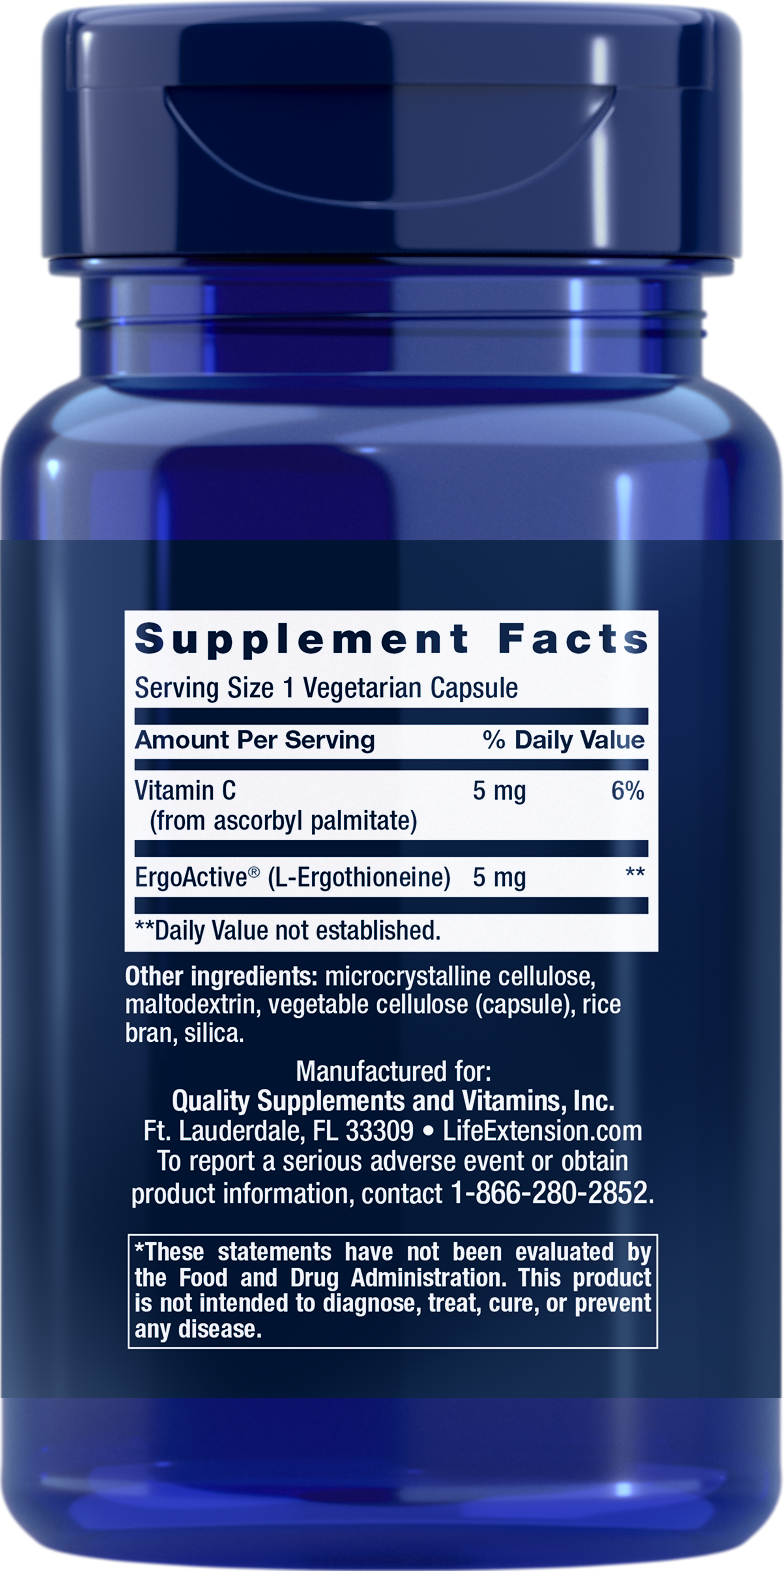 Life Extension Essential Youth L-Ergothioneine in 30 capsules, cell-protection and longevity benefits, supplement facts